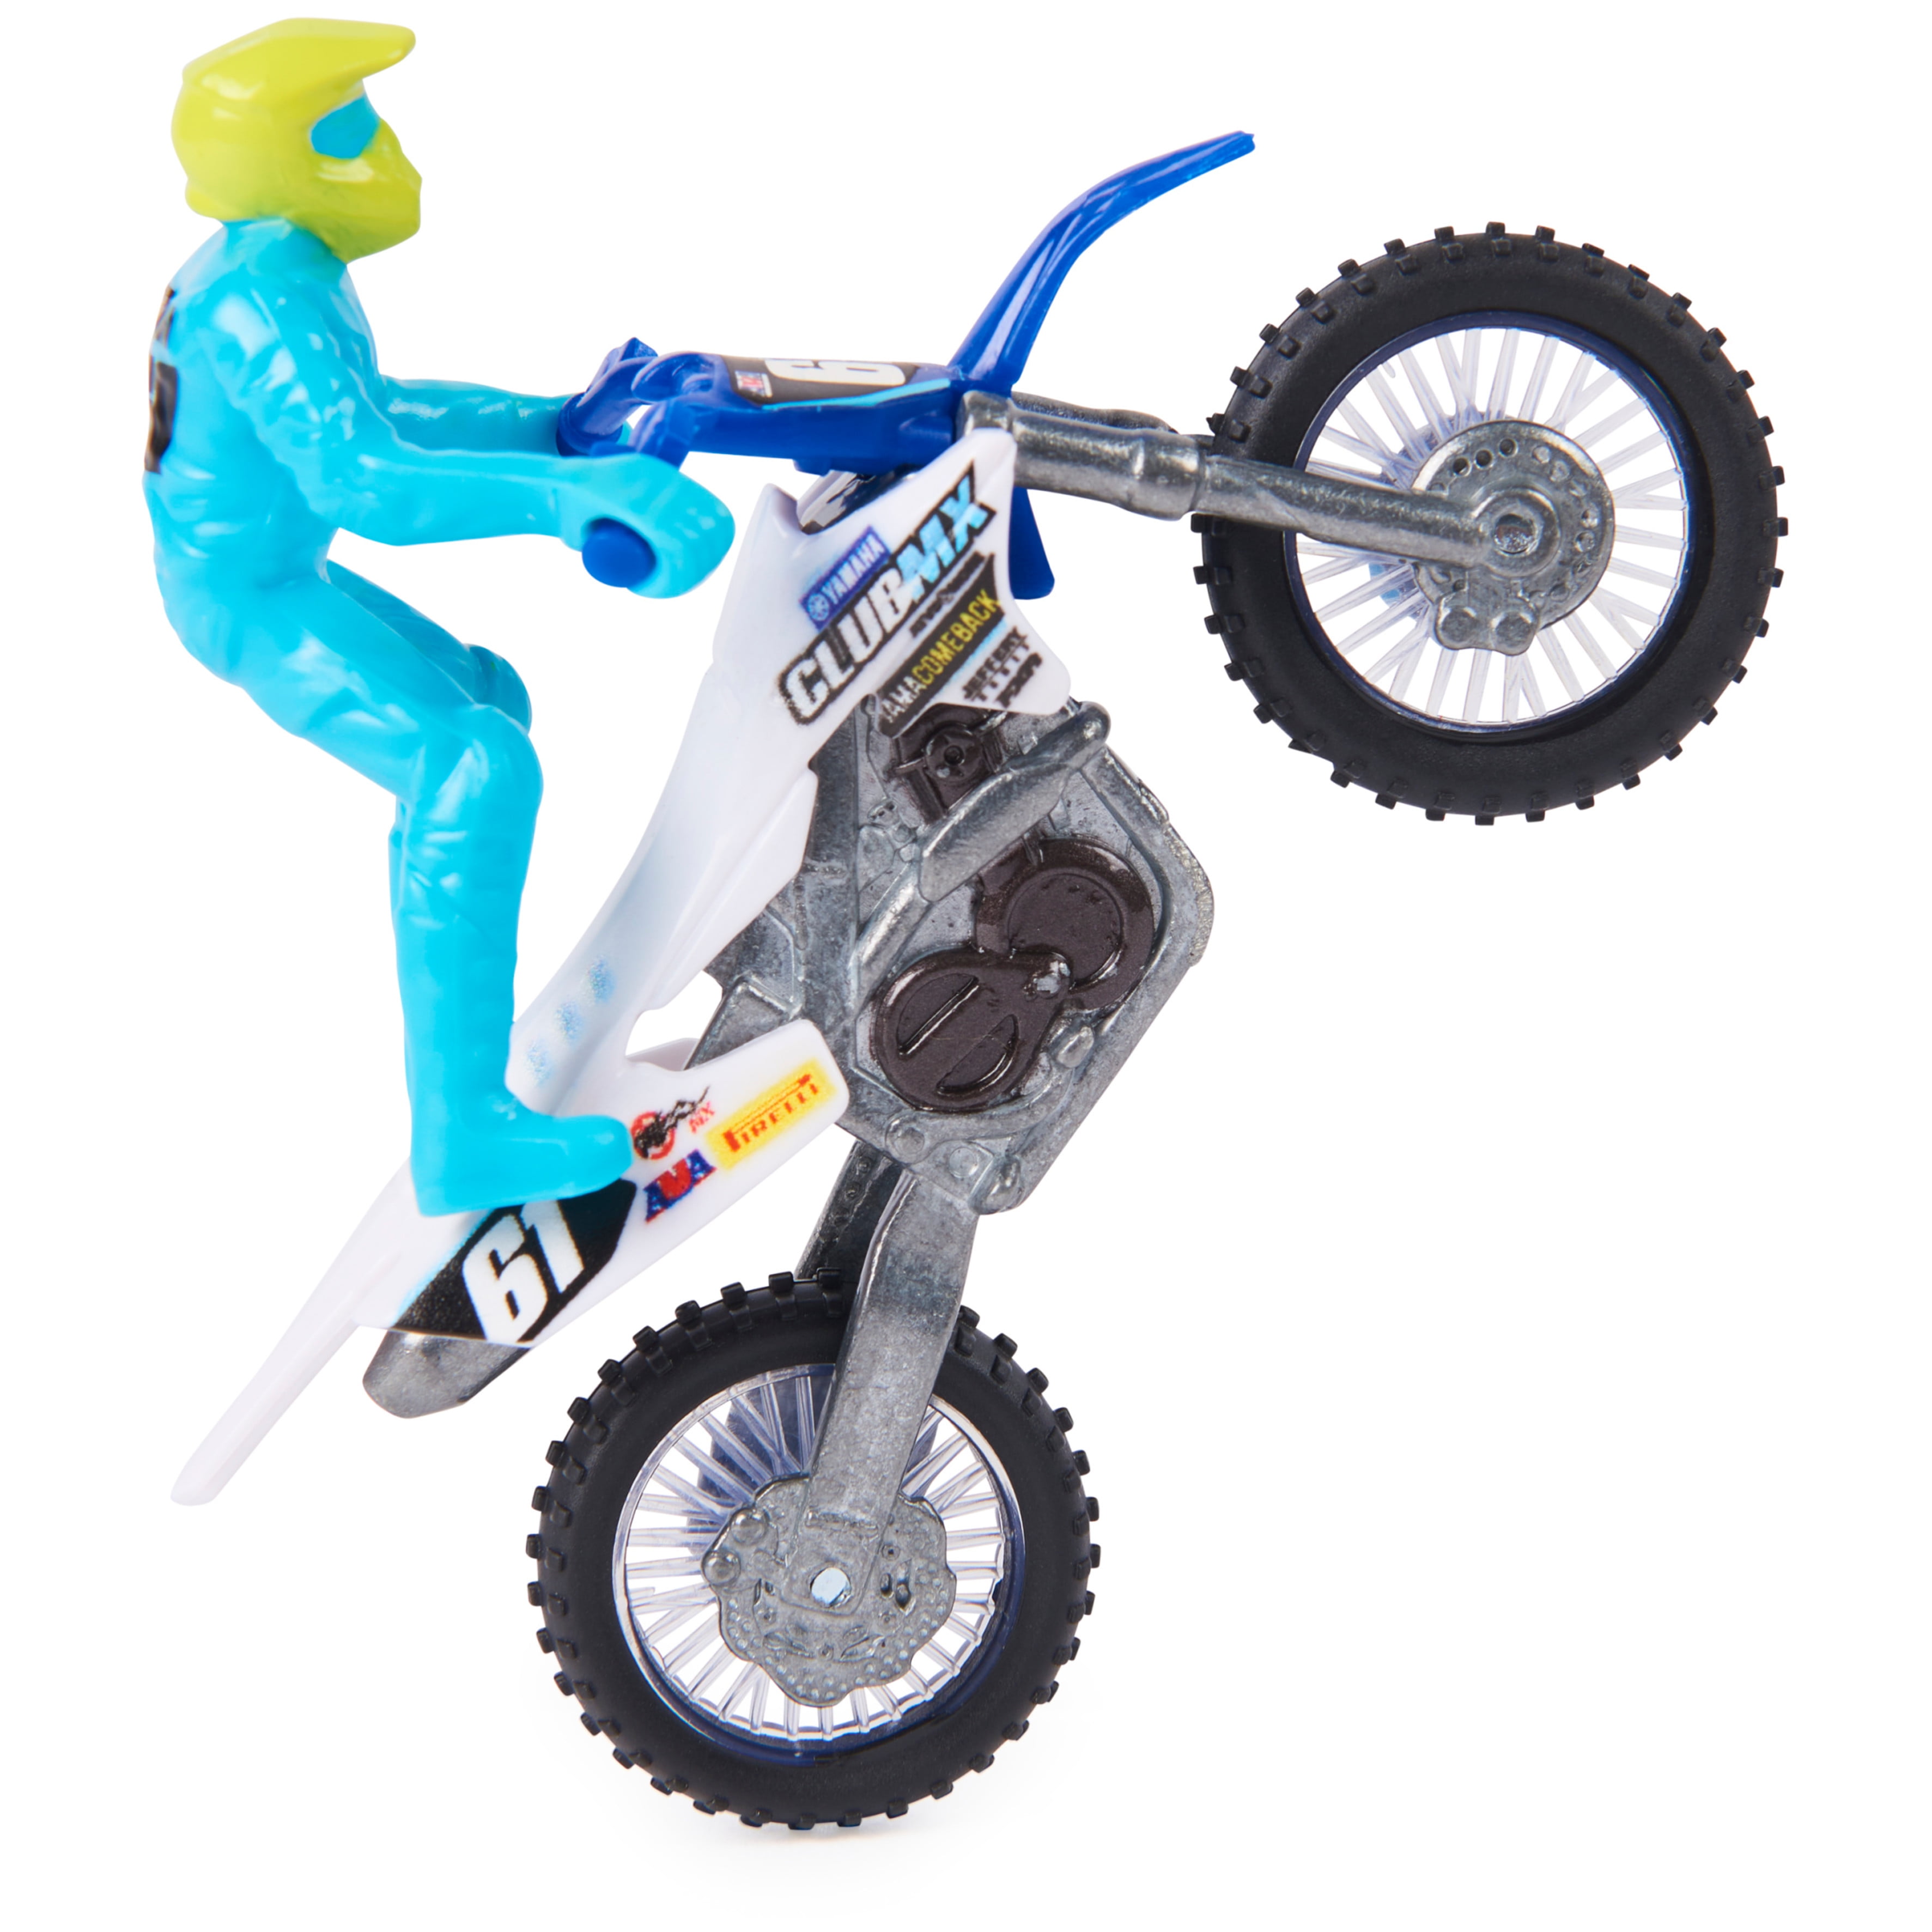 Supercross, Authentic 5-Pack of 1:24 Scale Die-Cast Motorcycles with Rider  Figure, Toy Moto Bike for Kids and Collectors Ages 3 and up, Small